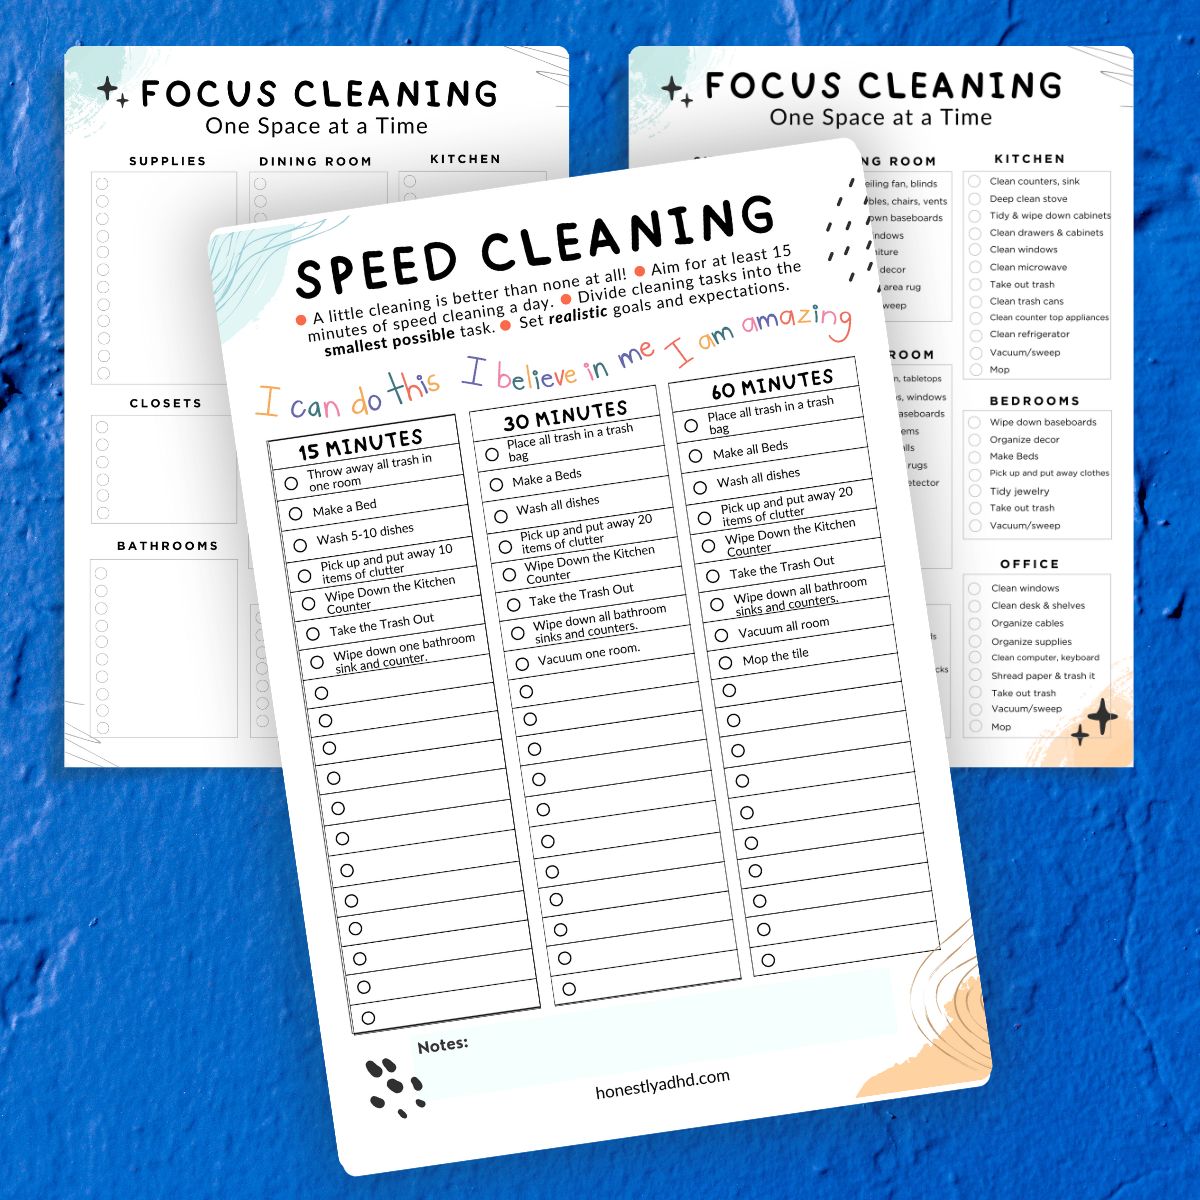 free-adhd-cleaning-checklist-how-to-clean-with-adhd-honestly-adhd